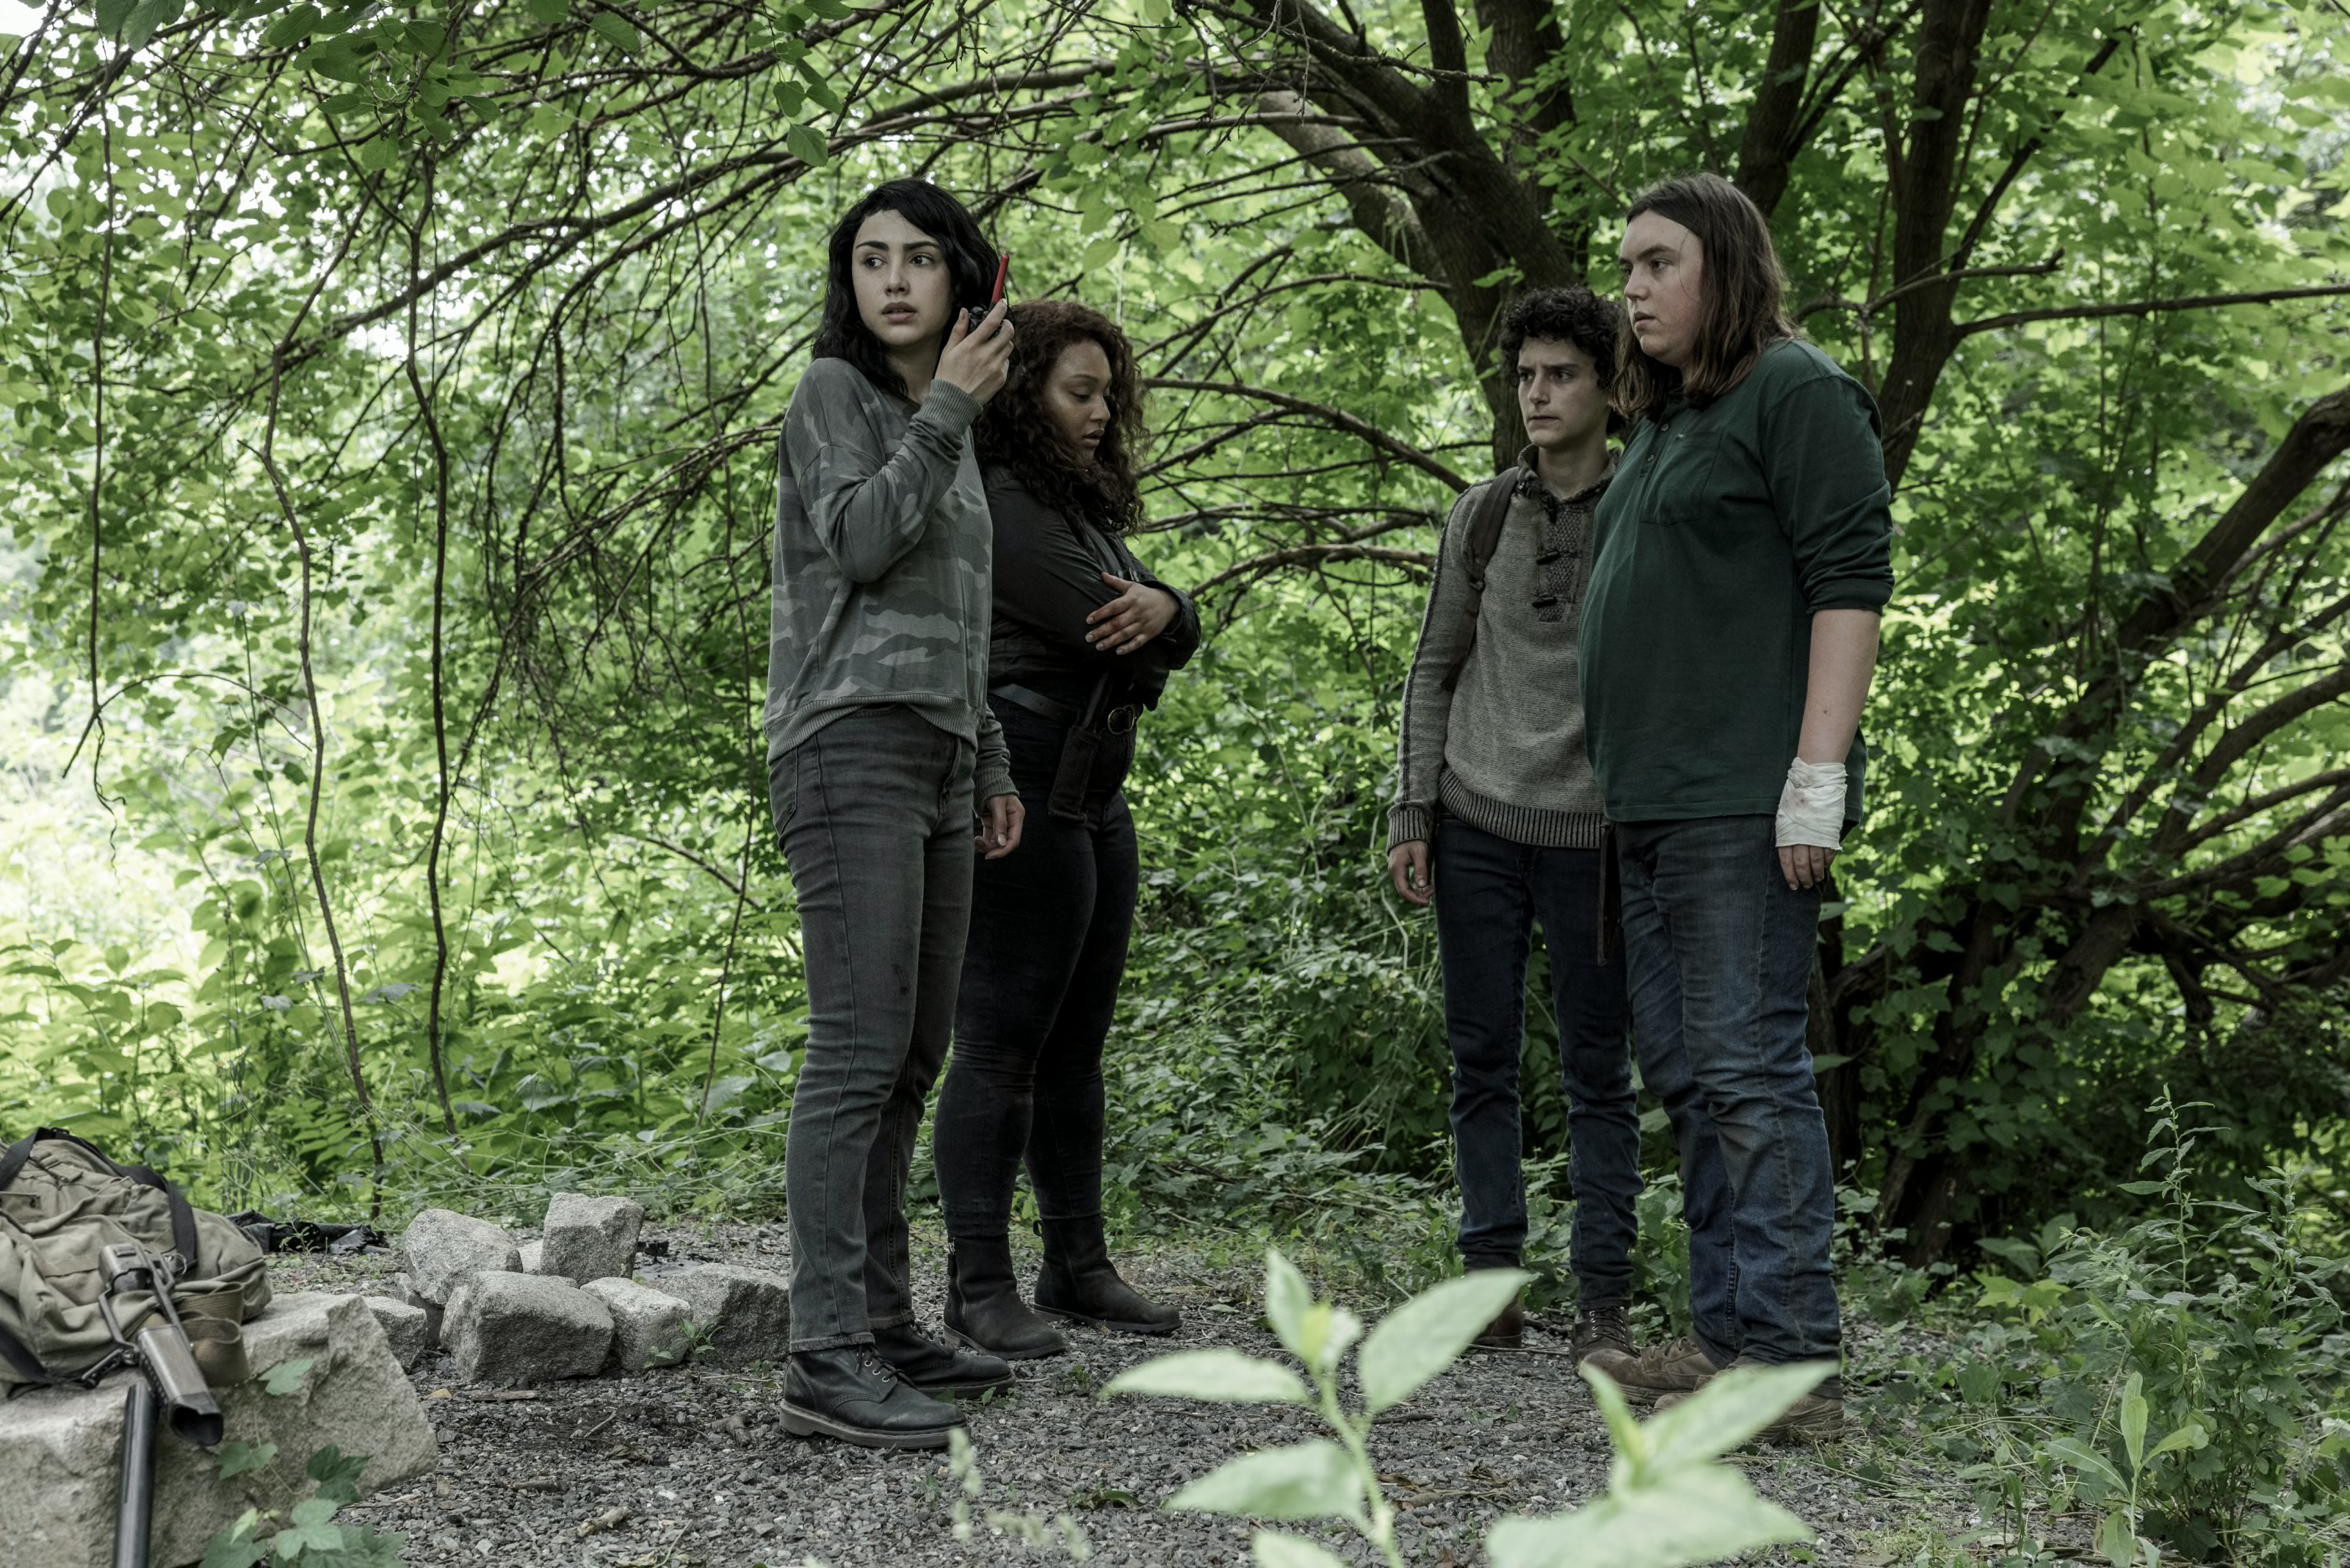 TWD: World Beyond Recap: Penultimate Episode Makes a Casualty of [Spoiler]